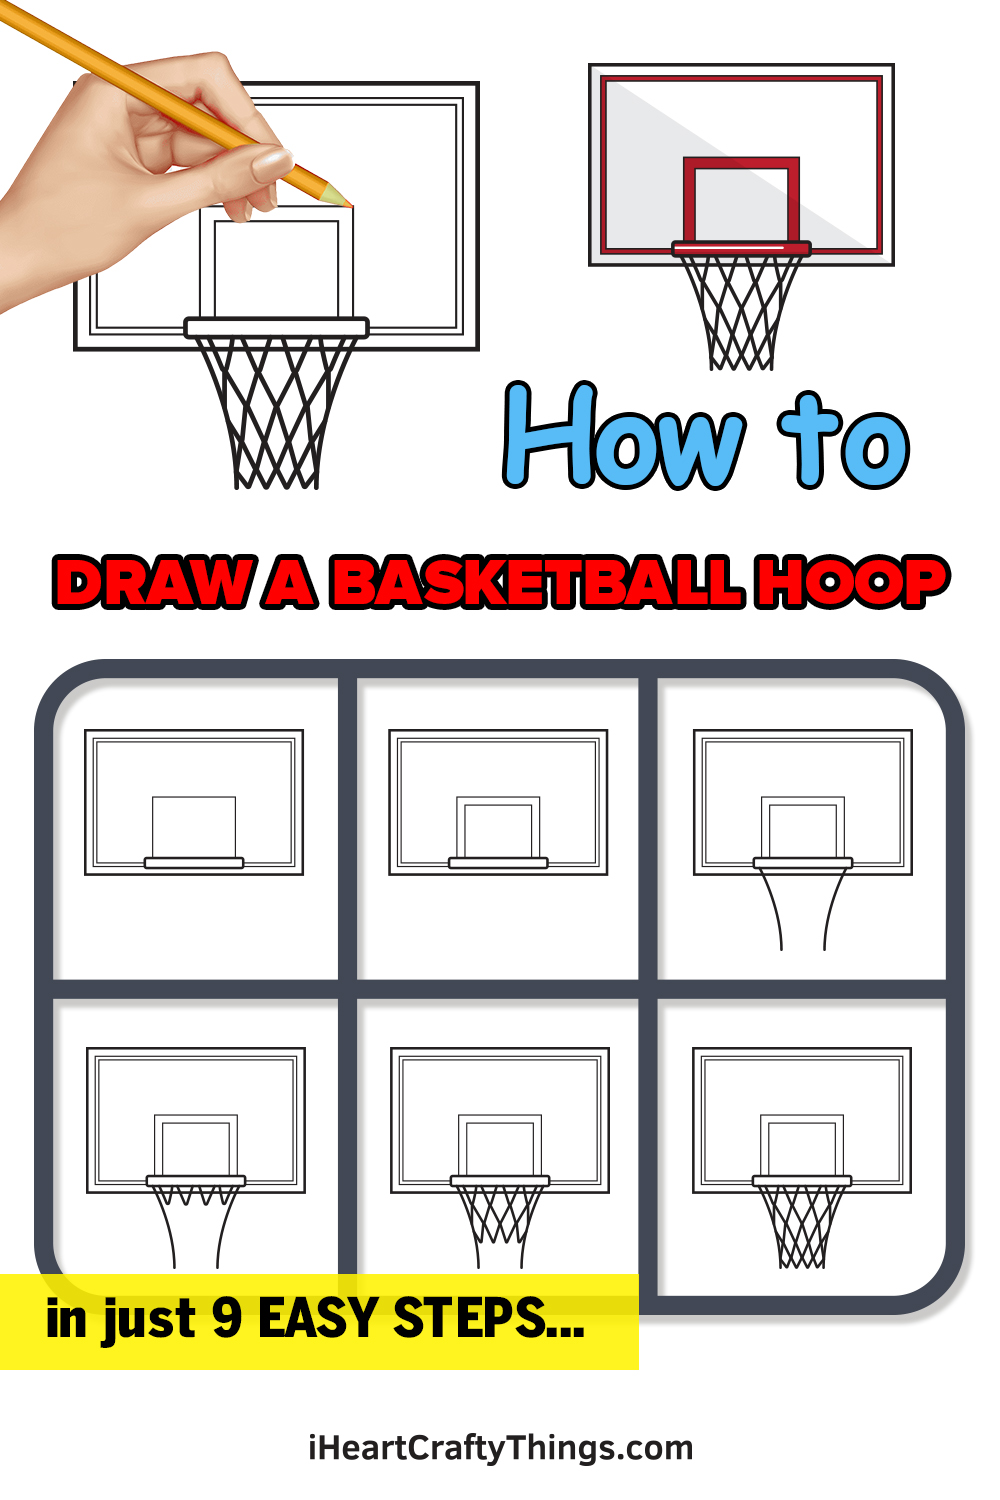 how to draw a basketball hoop in 9 easy steps